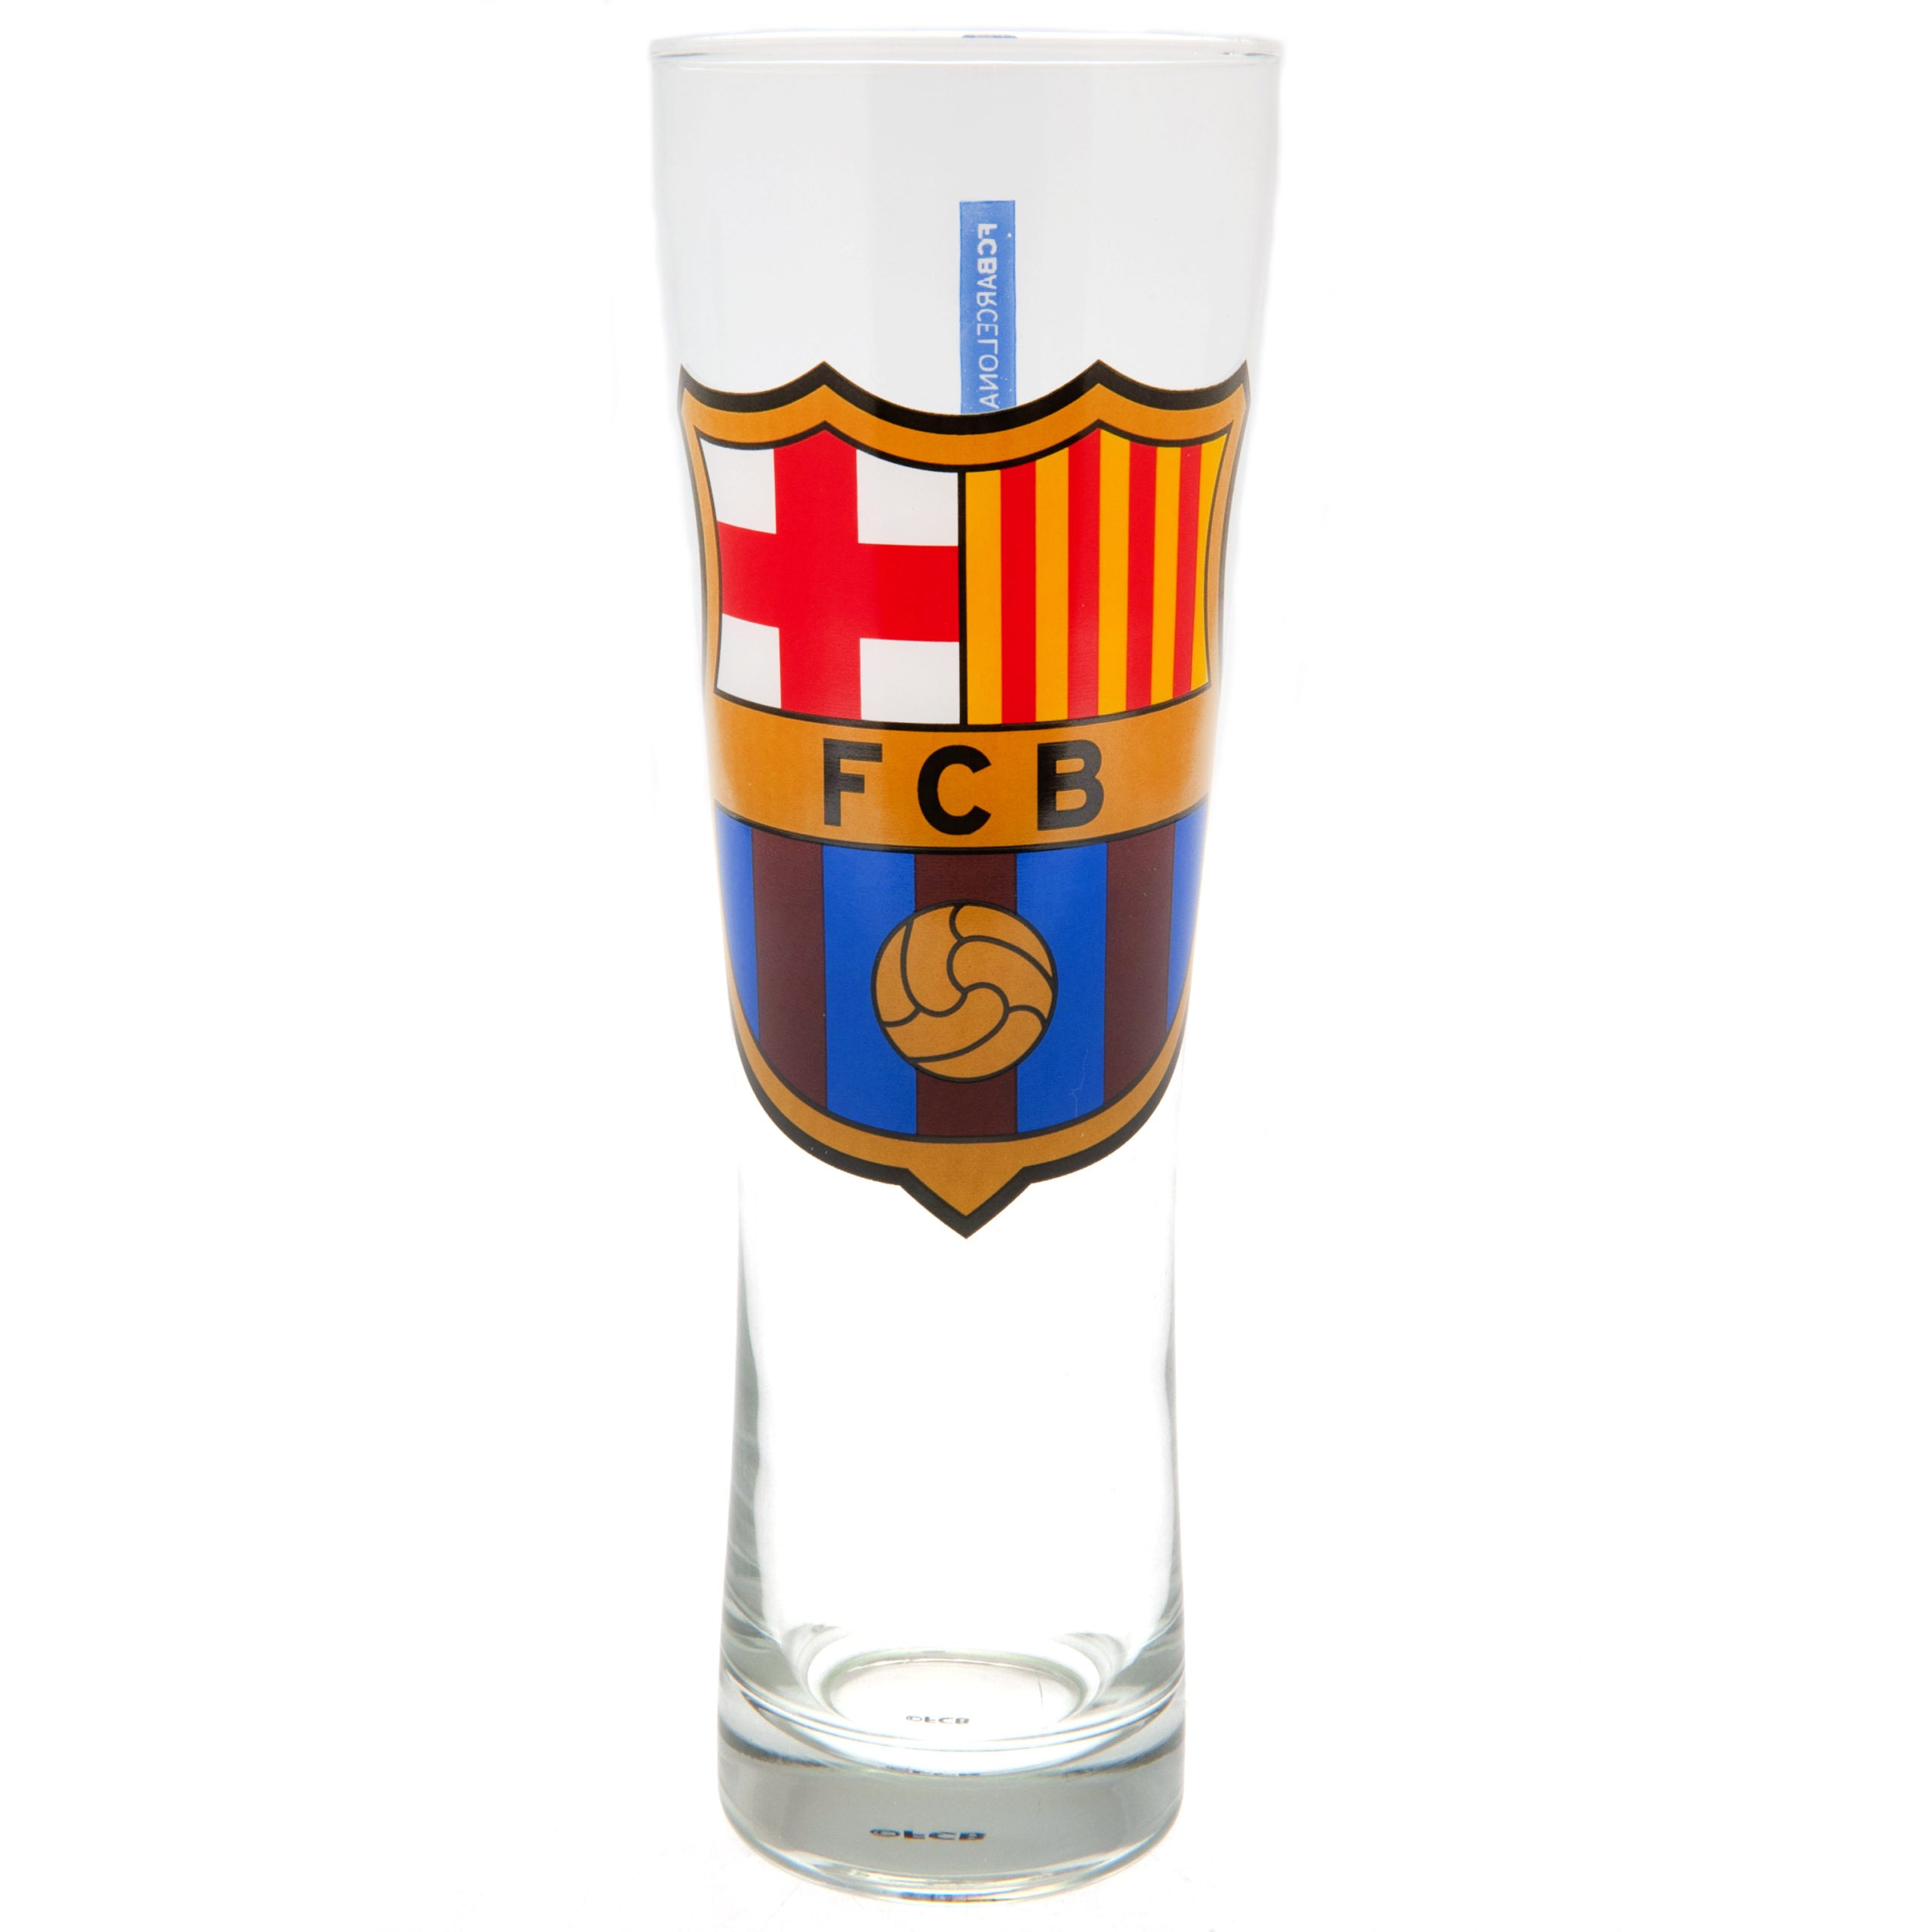 View FC Barcelona Tall Beer Glass CR information